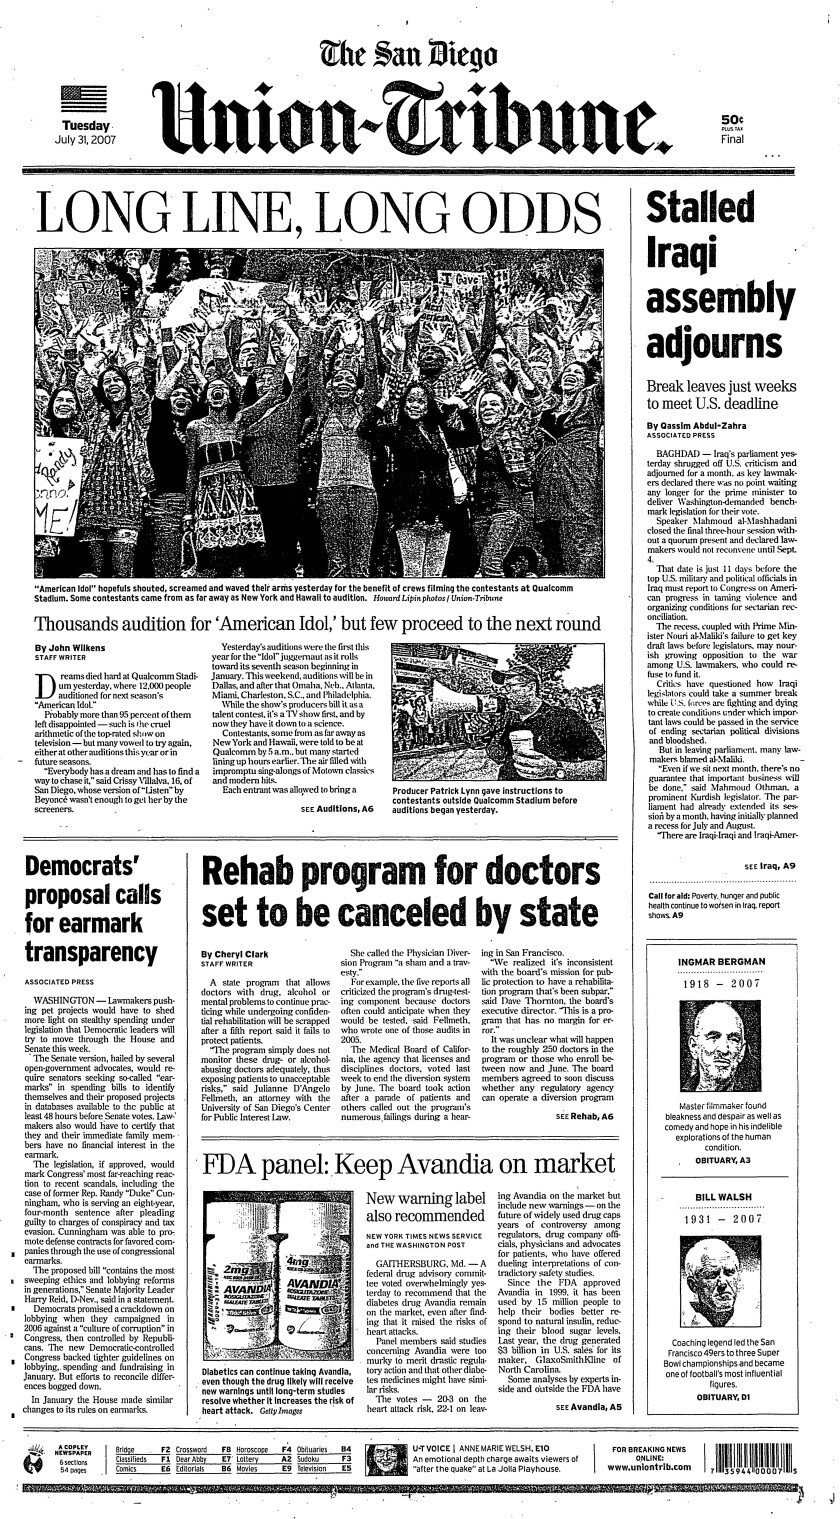 The front page of The San Diego Union-Tribune,  July 31, 2007"